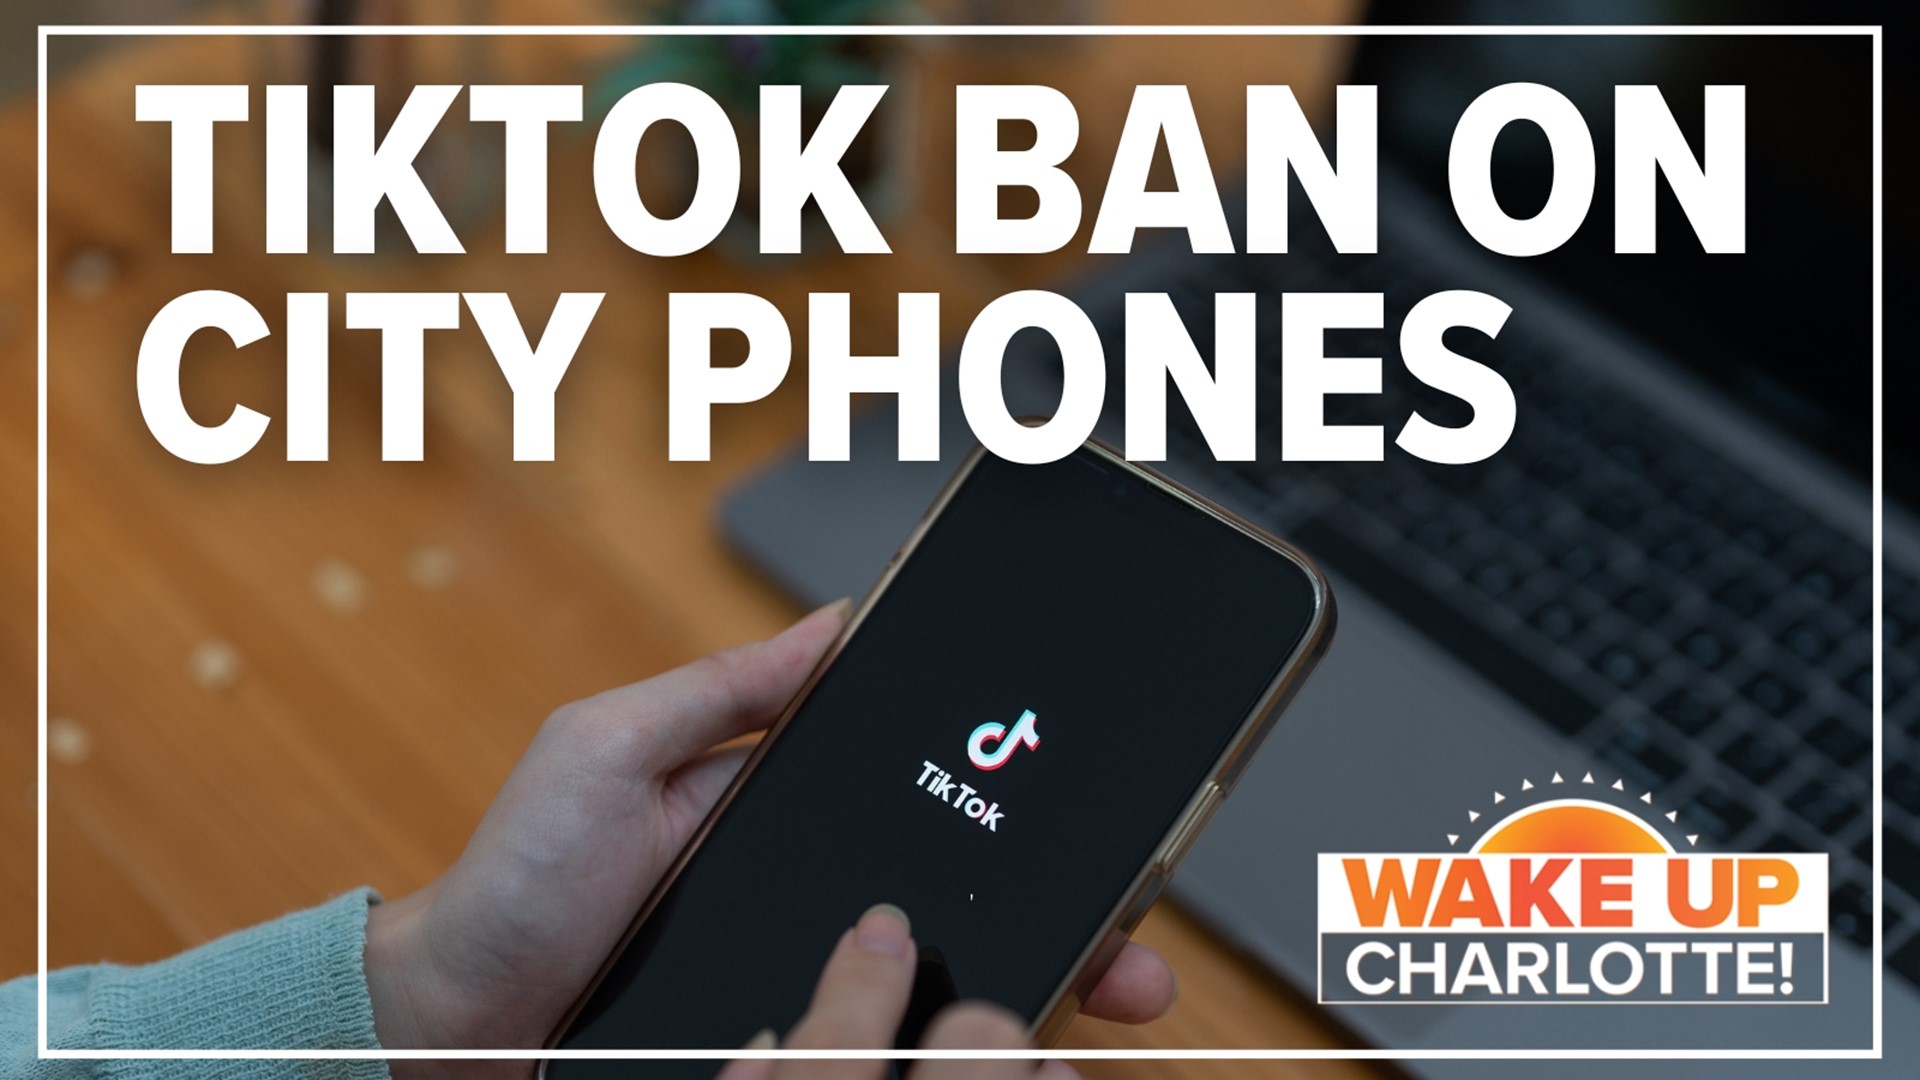 In a push for national security, NC officials are hoping to get TikTok banned from government-issued devices. South Carolina has already instituted this ban.